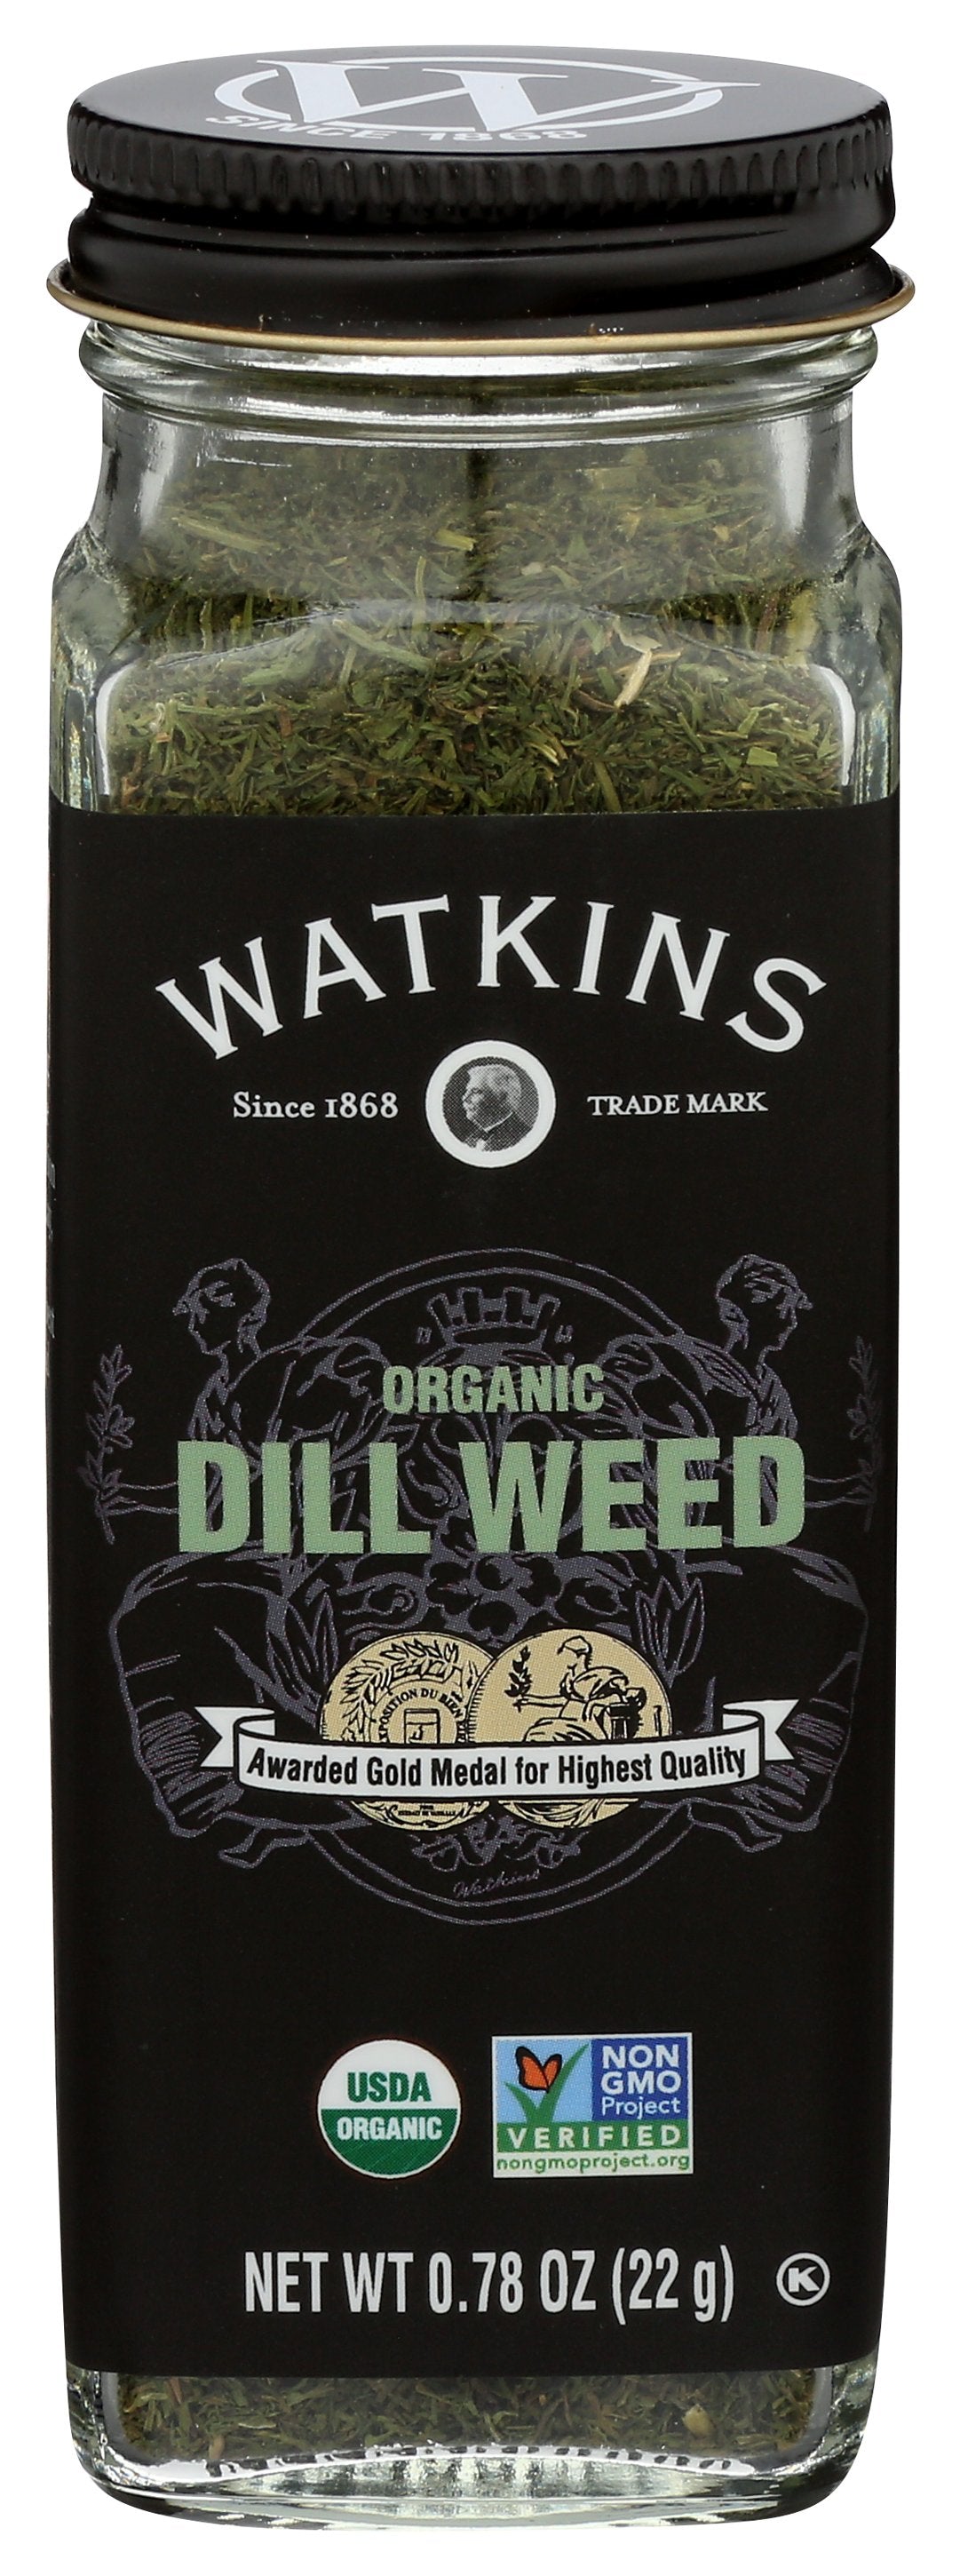 WATKINS DILL WEED ORG - Case of 3